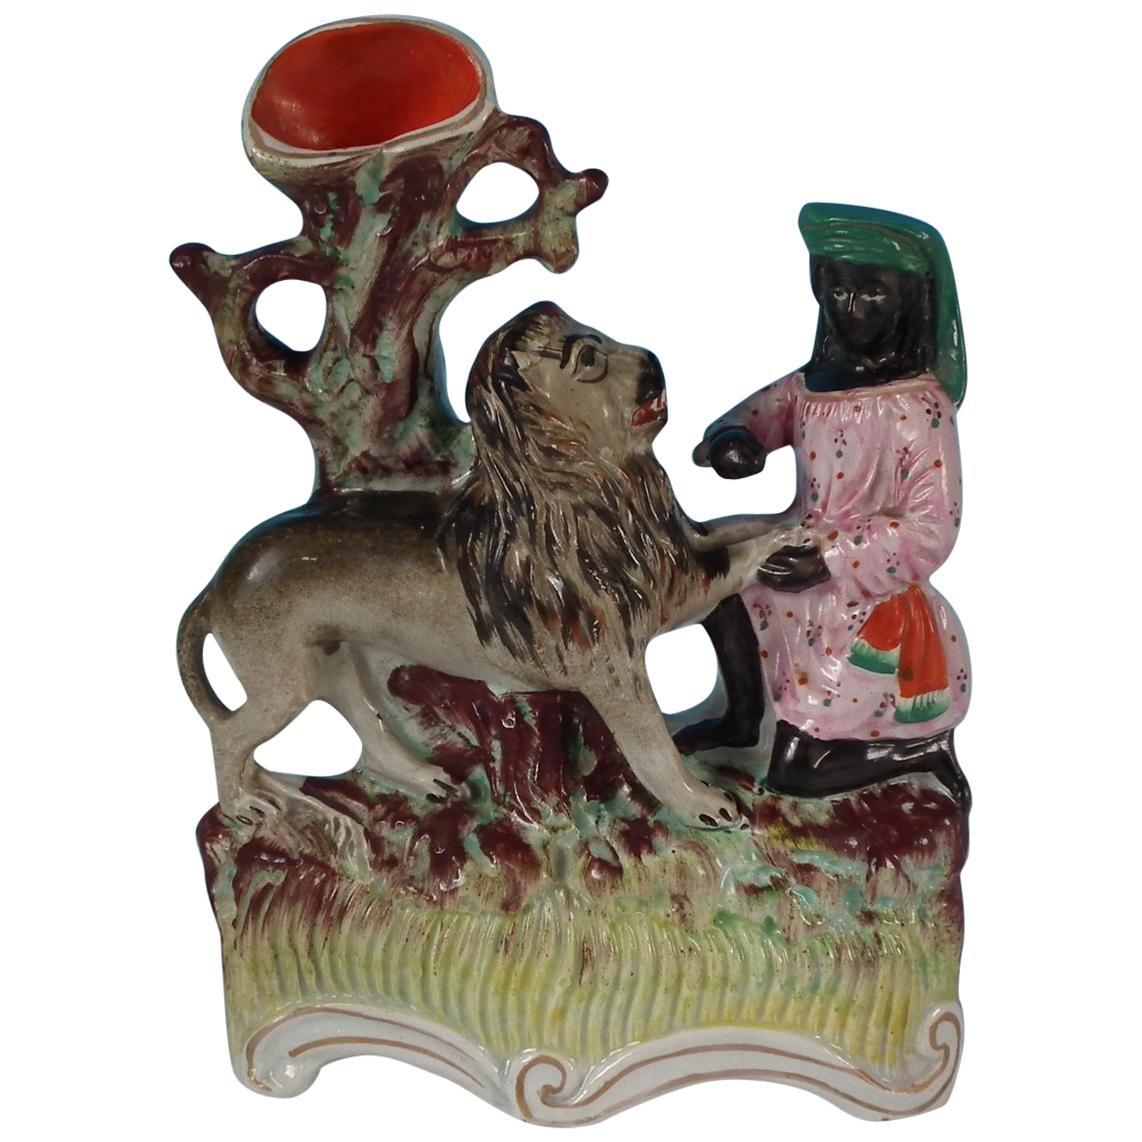 Staffordshire Macombo and Lion Spill Vase